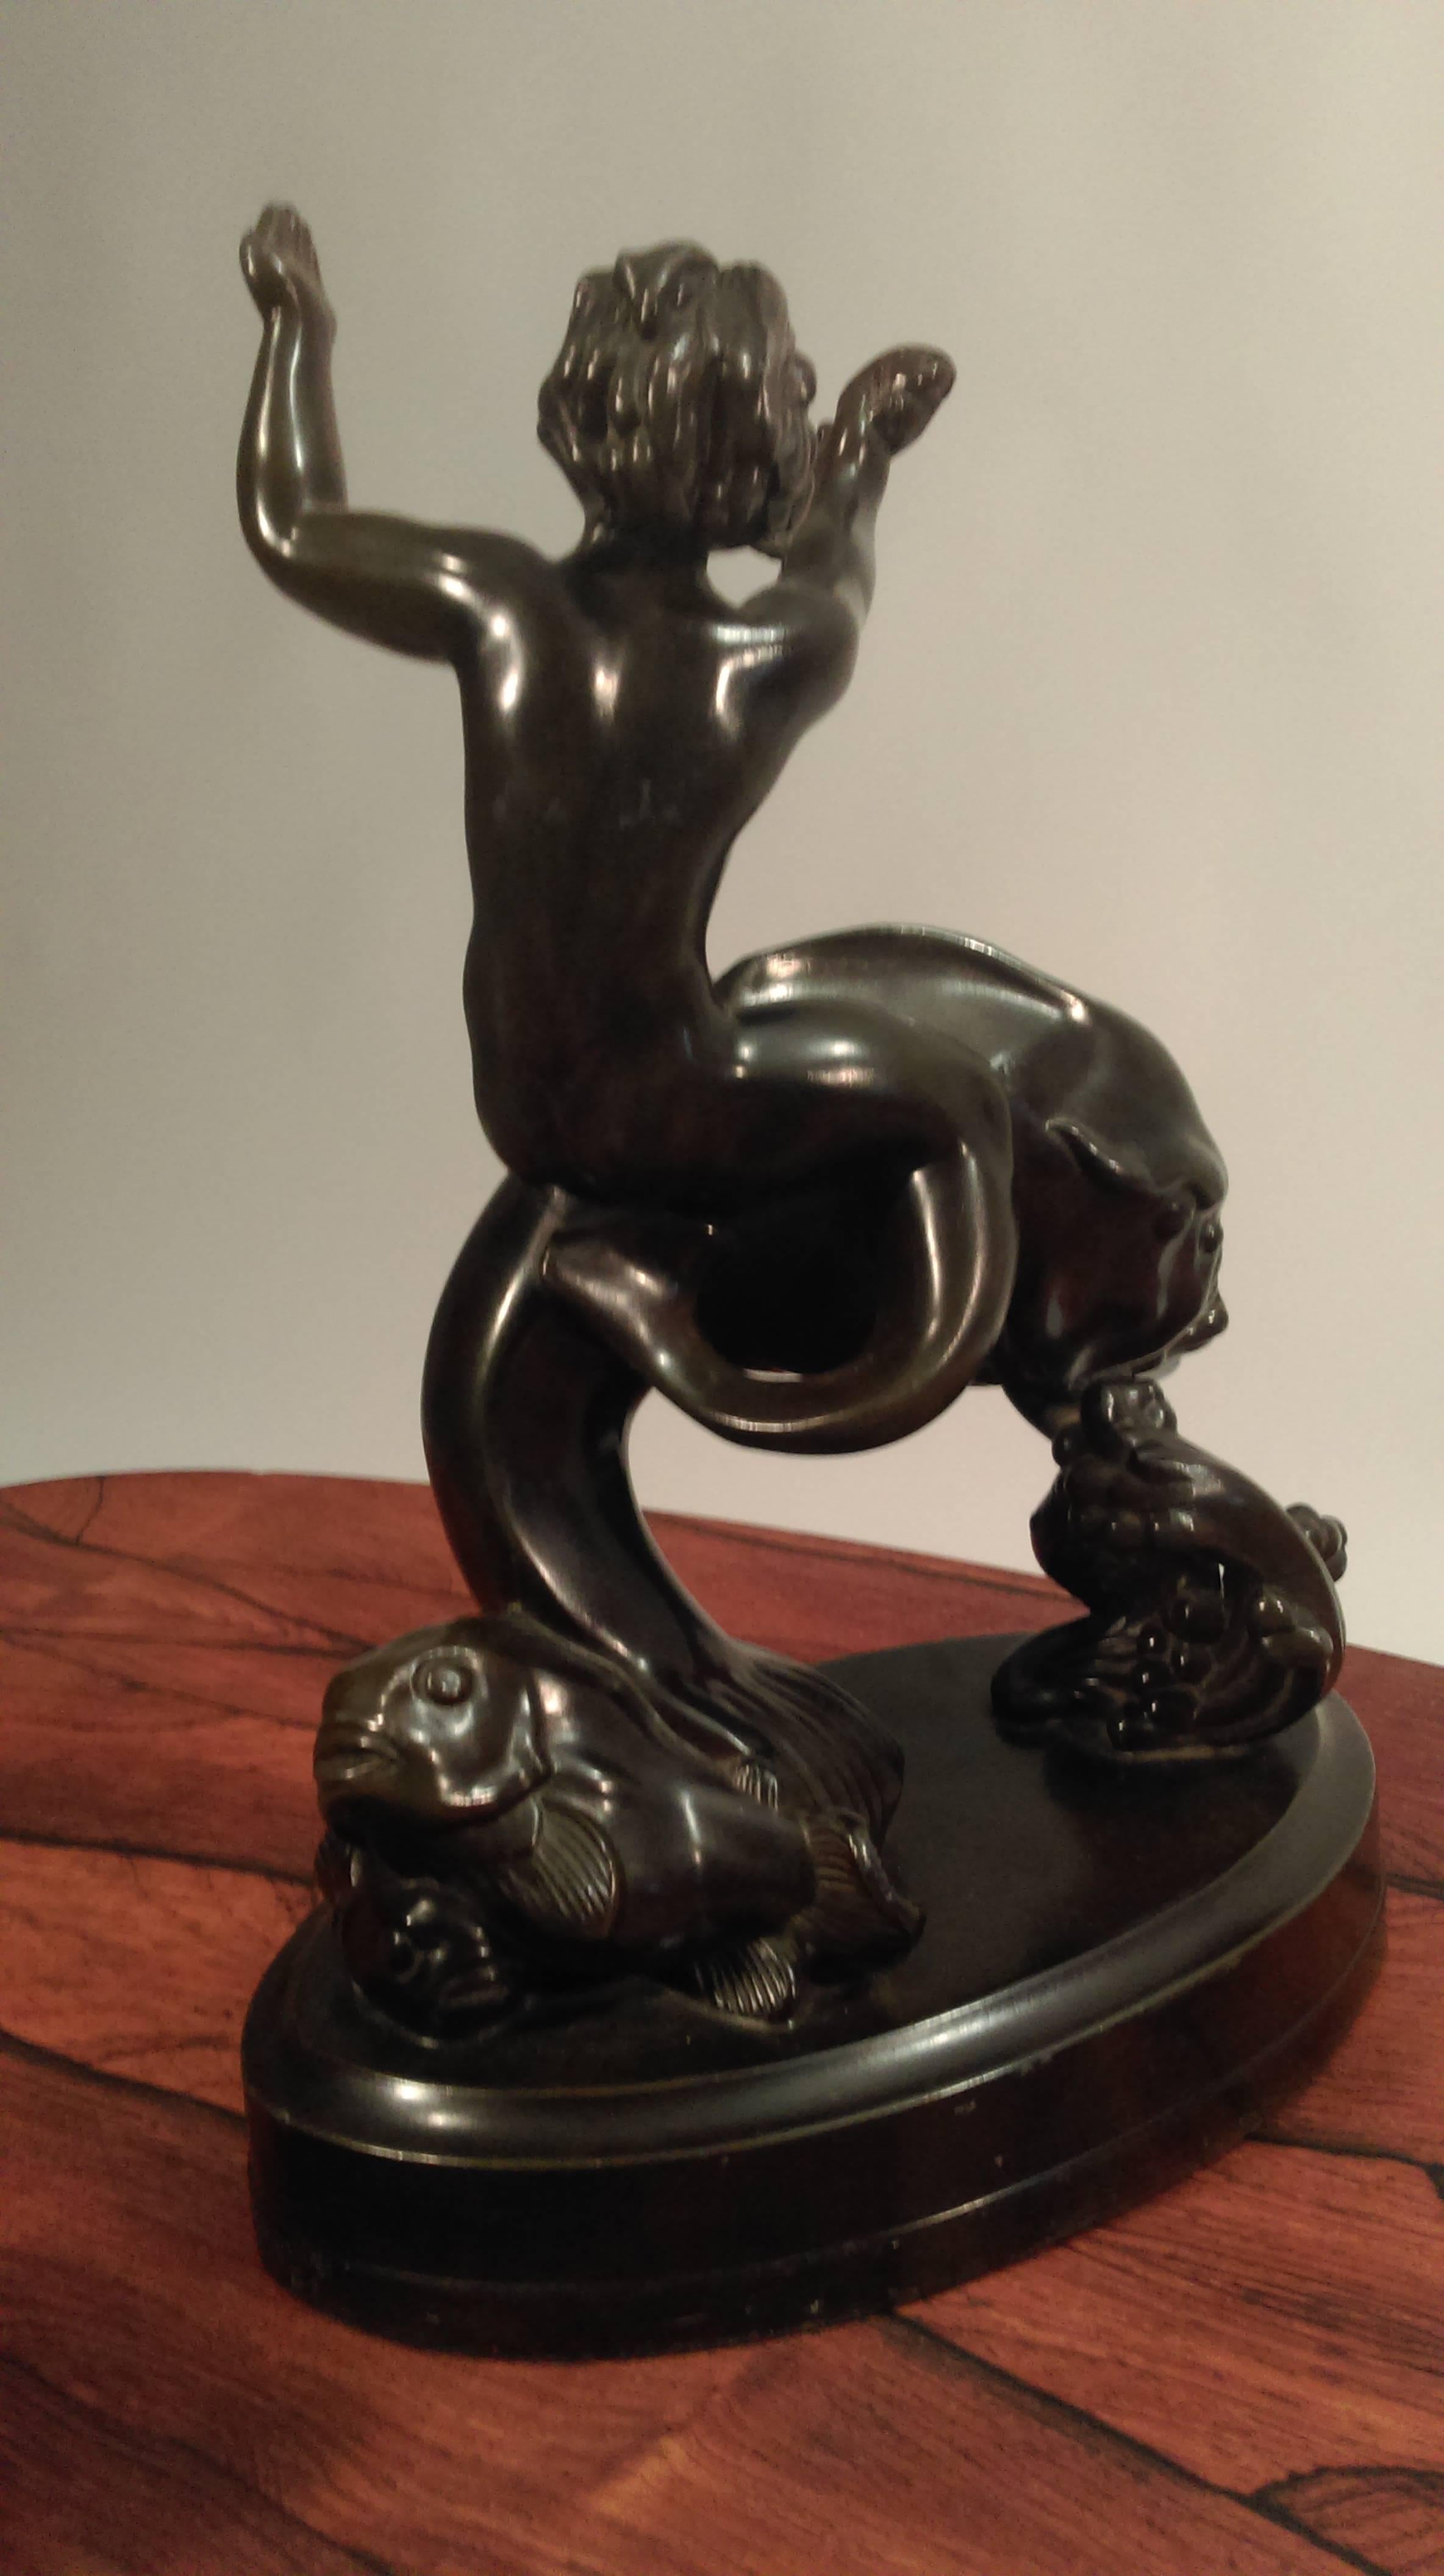 Just Andersen 1884 - 1943 - sculpture of a merman and fish with lots of details that catch the eye.

The sculpture is one of Just Andersens most advanced sculptures and in very good condition. The sculpture is made of black disco metal - an alloy of